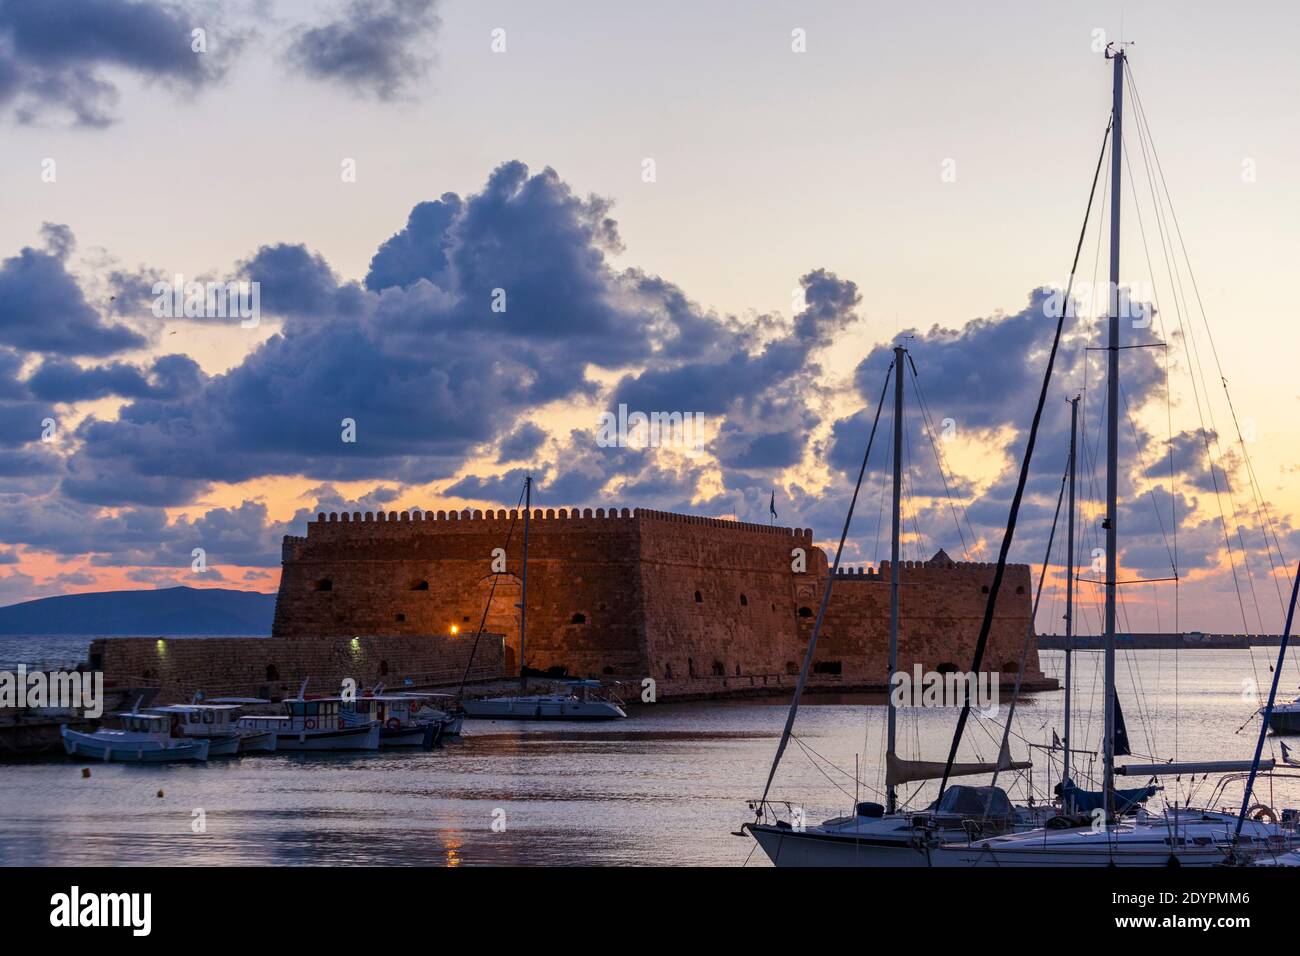 Sunrise at Heraklion old port, in Crete island, Greece, Europe. The fortress seen is Koules (Kules), the old venetian castle also known as Roca a Mare Stock Photo